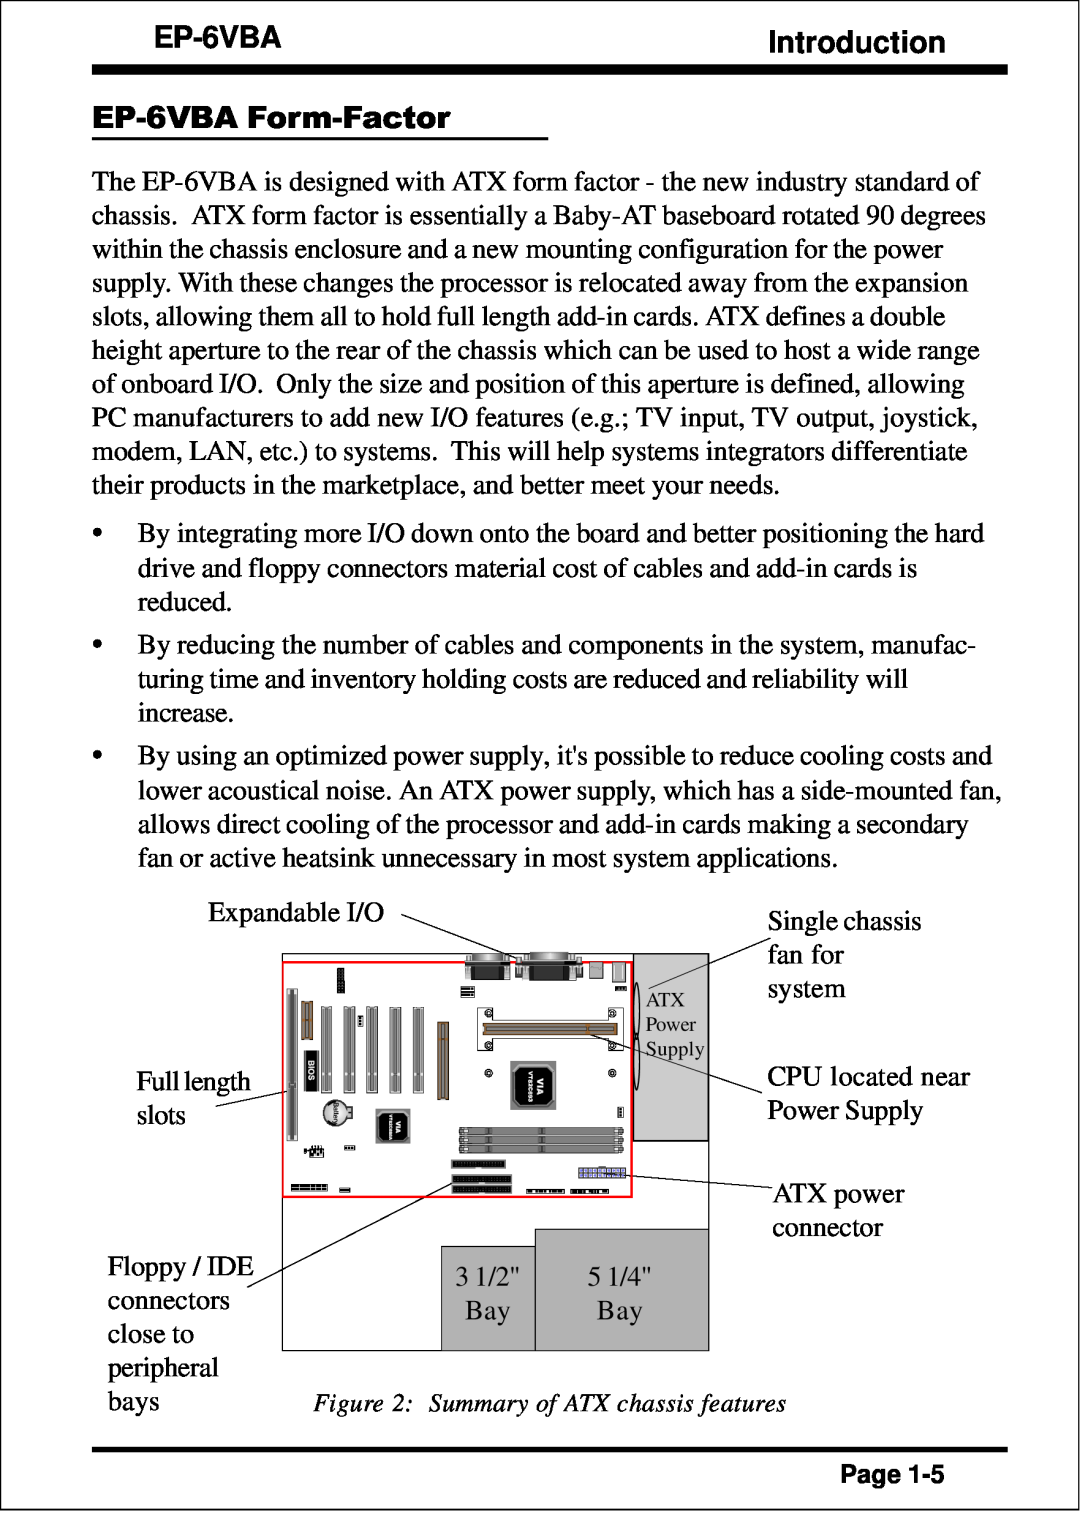 EPoX Computer specifications Introduction, EP-6VBA Form-Factor, Summary of ATX chassis features 